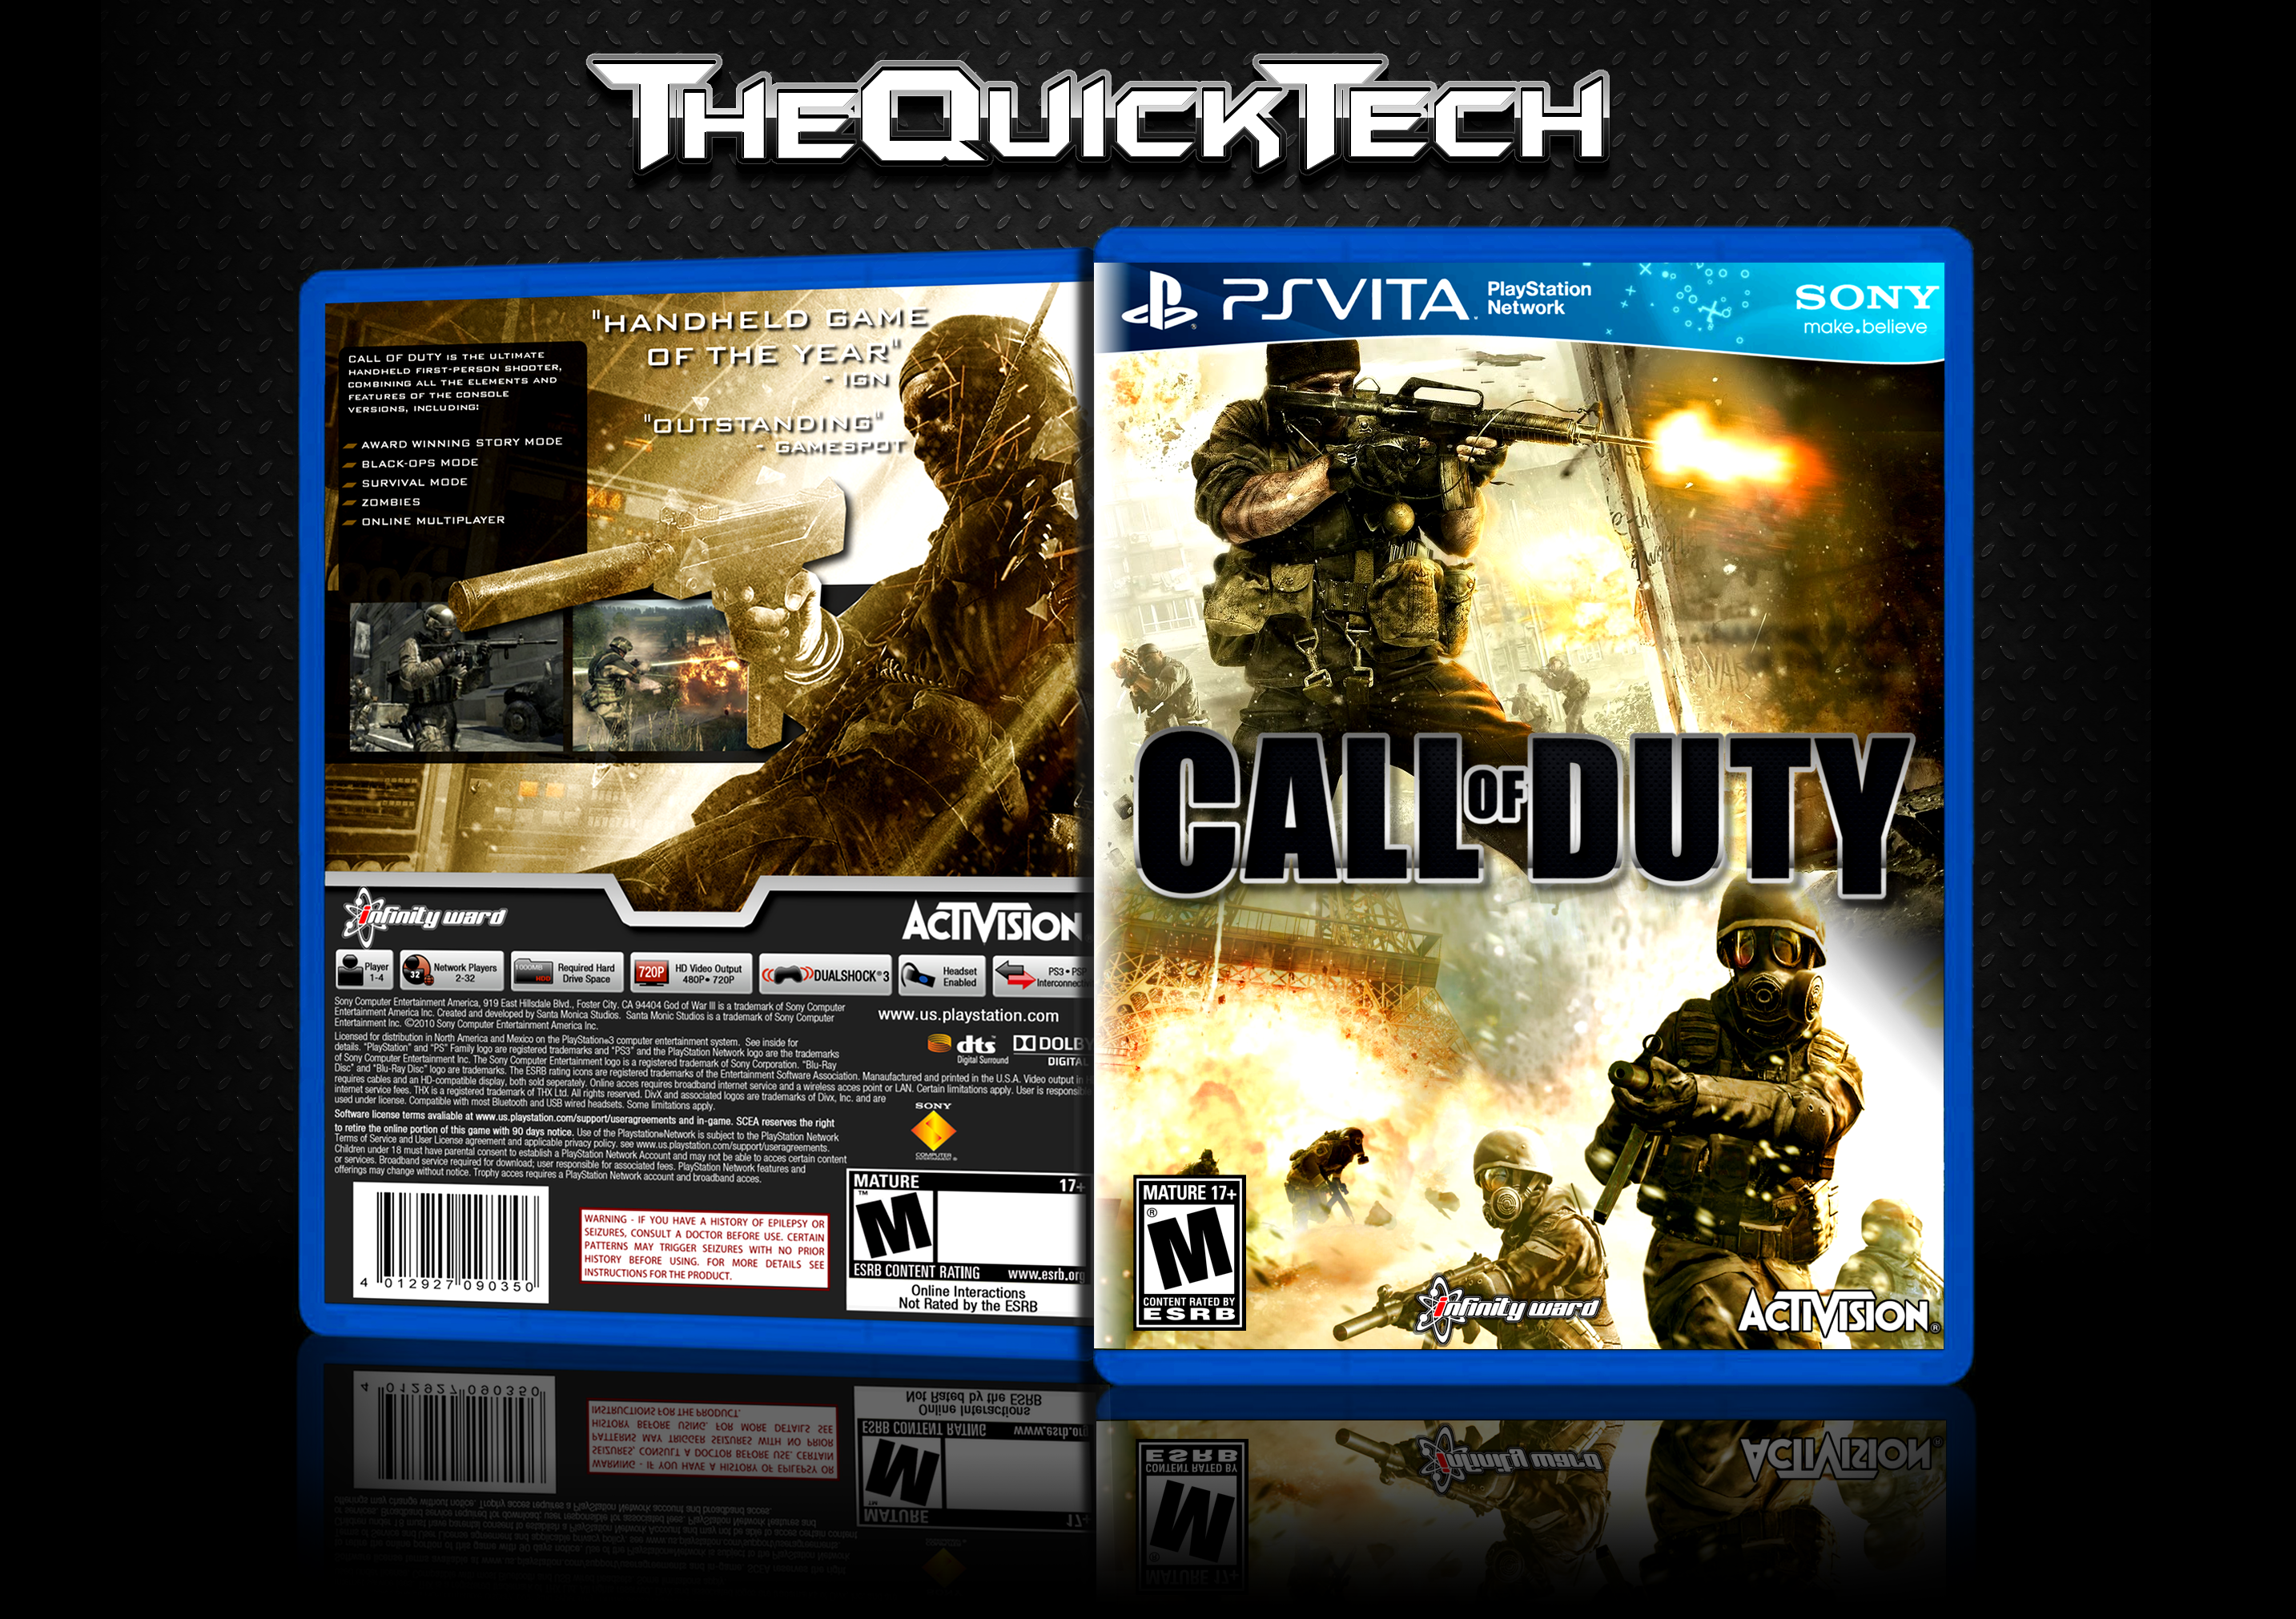 Call Of Duty box cover